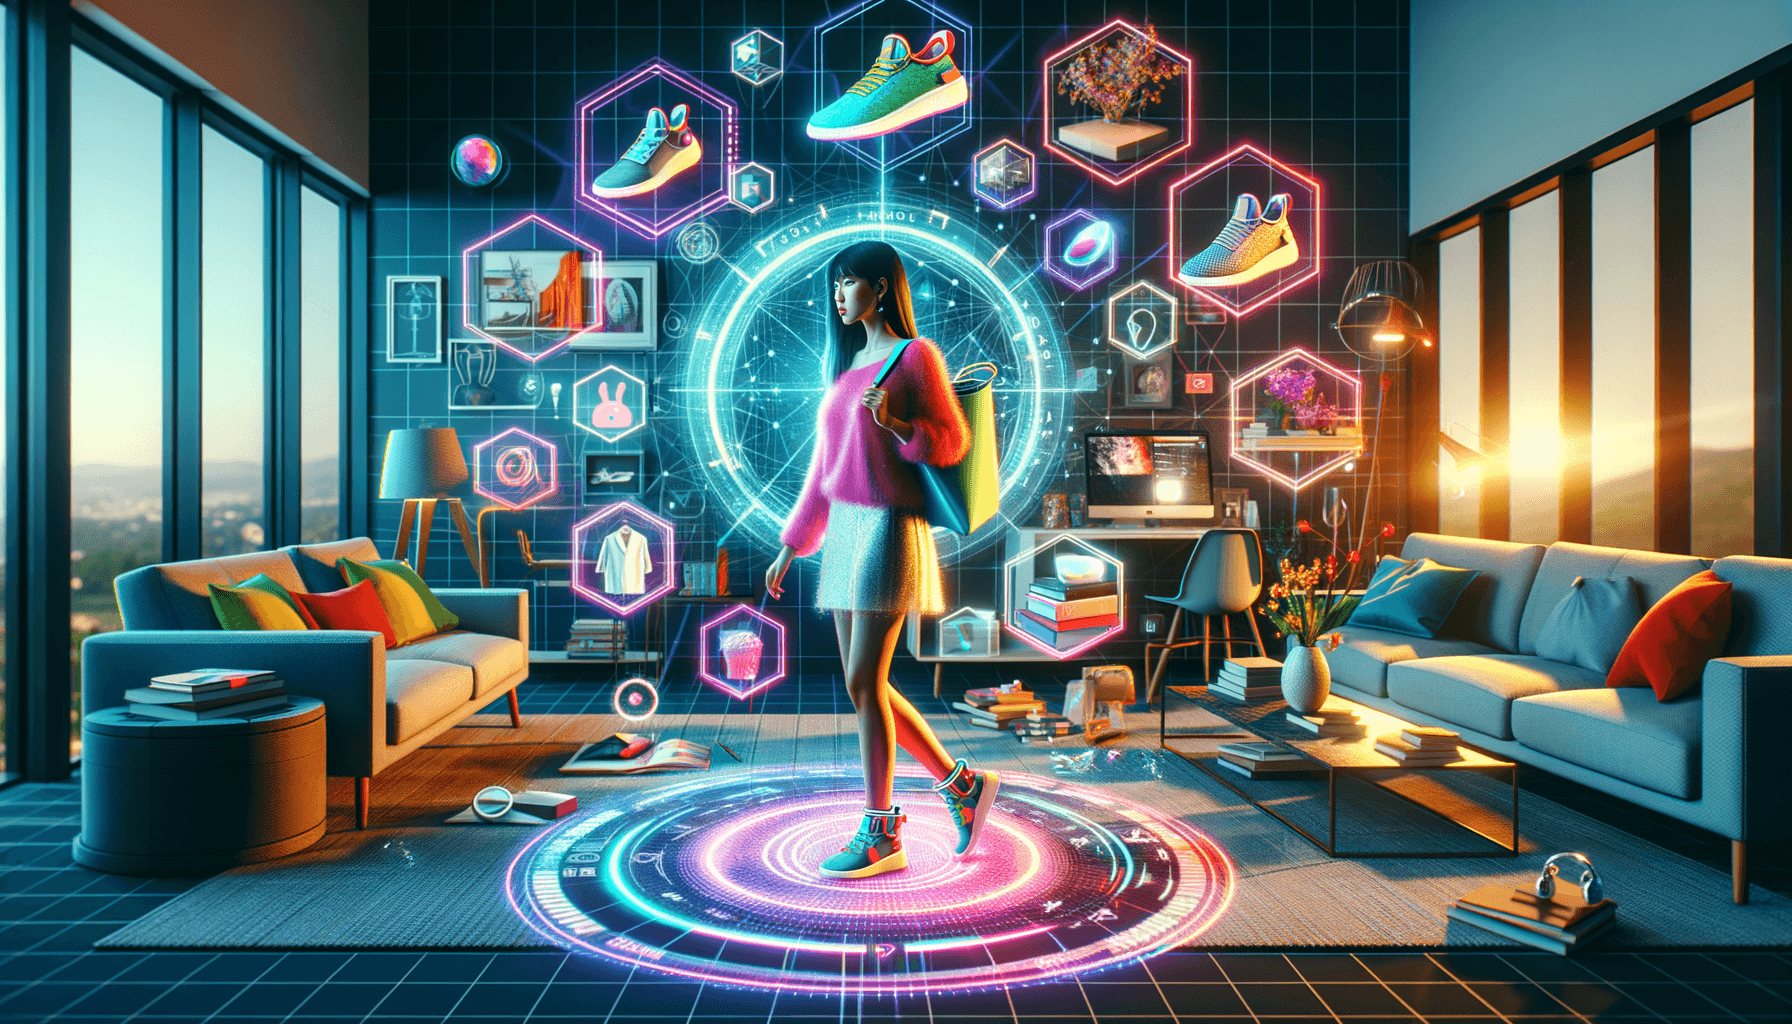 "Experience the future of digital interaction with WebAR - Try on Gucci shoes & place IKEA furniture at home, straight from your browser! Discover the $340 billion revolution of online shopping and interactive learning in our latest article. #WebAR #FutureOfTech #InteractiveLearning #VirtualTryOn #DigitalRevolution"